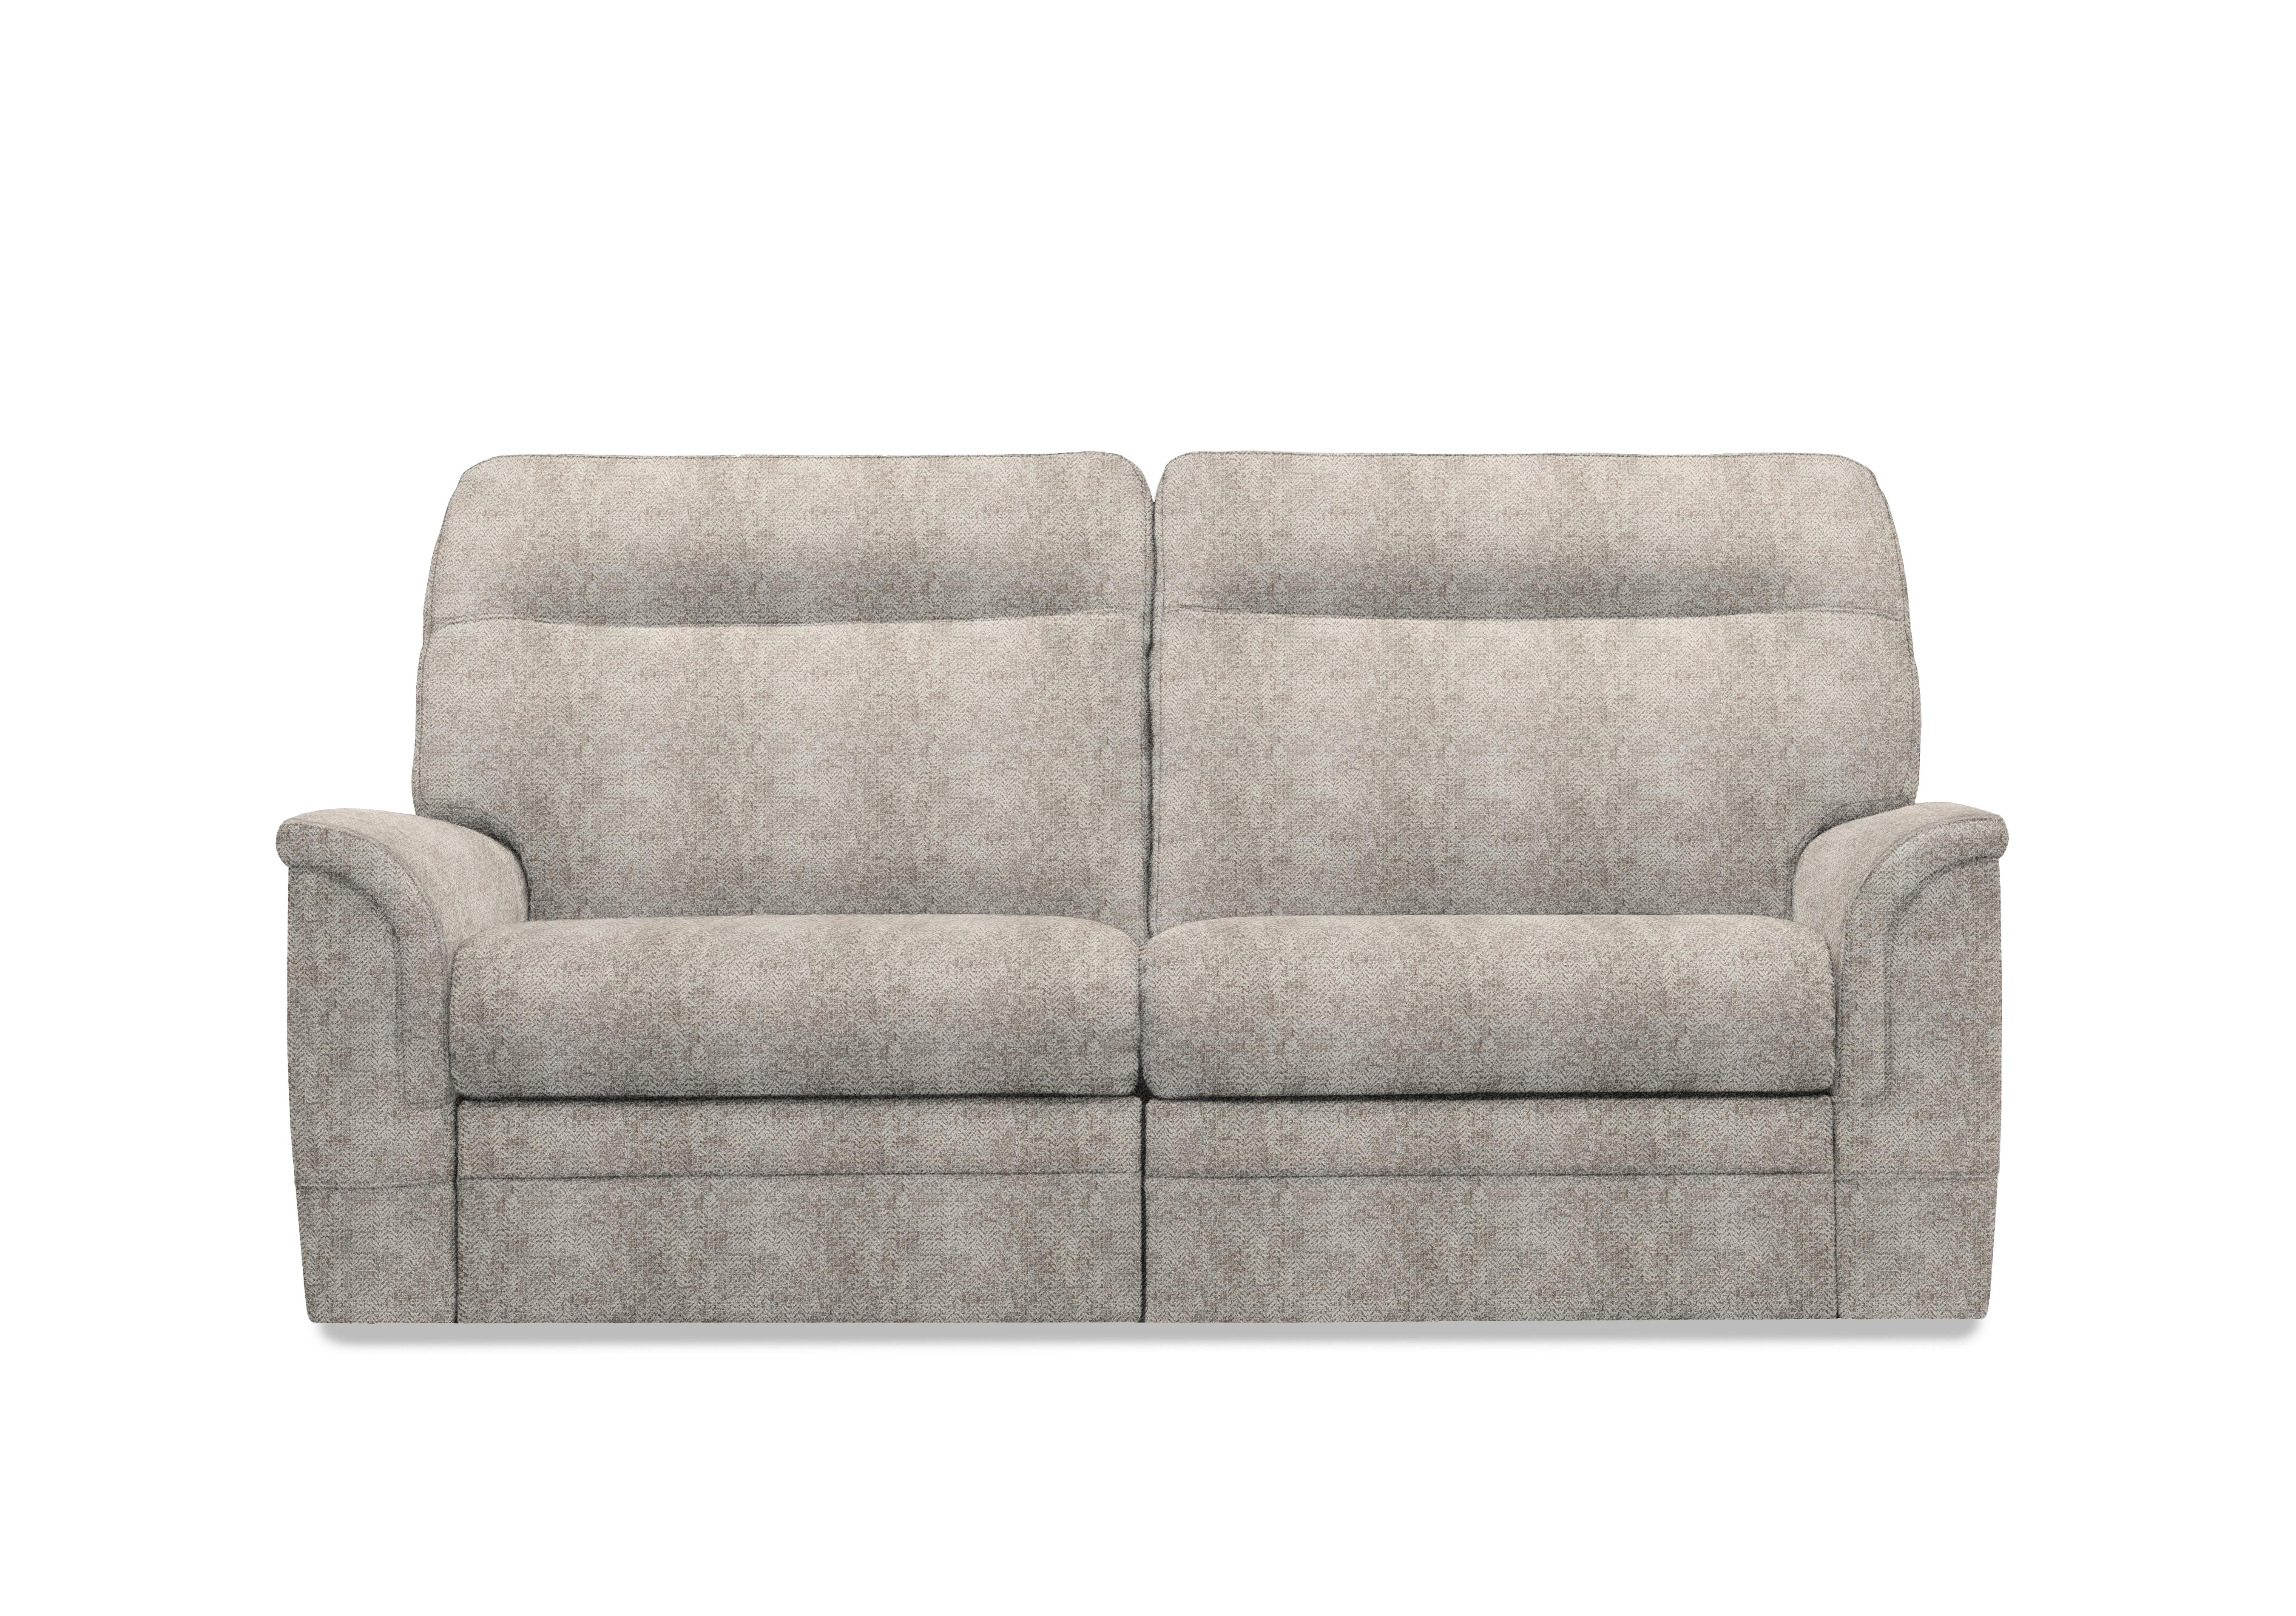 Hudson 23 Large 2 Seater Fabric Power Recliner Sofa with Power Headrests and Power Lumbar in Ida Stone 006035-0055 on Furniture Village